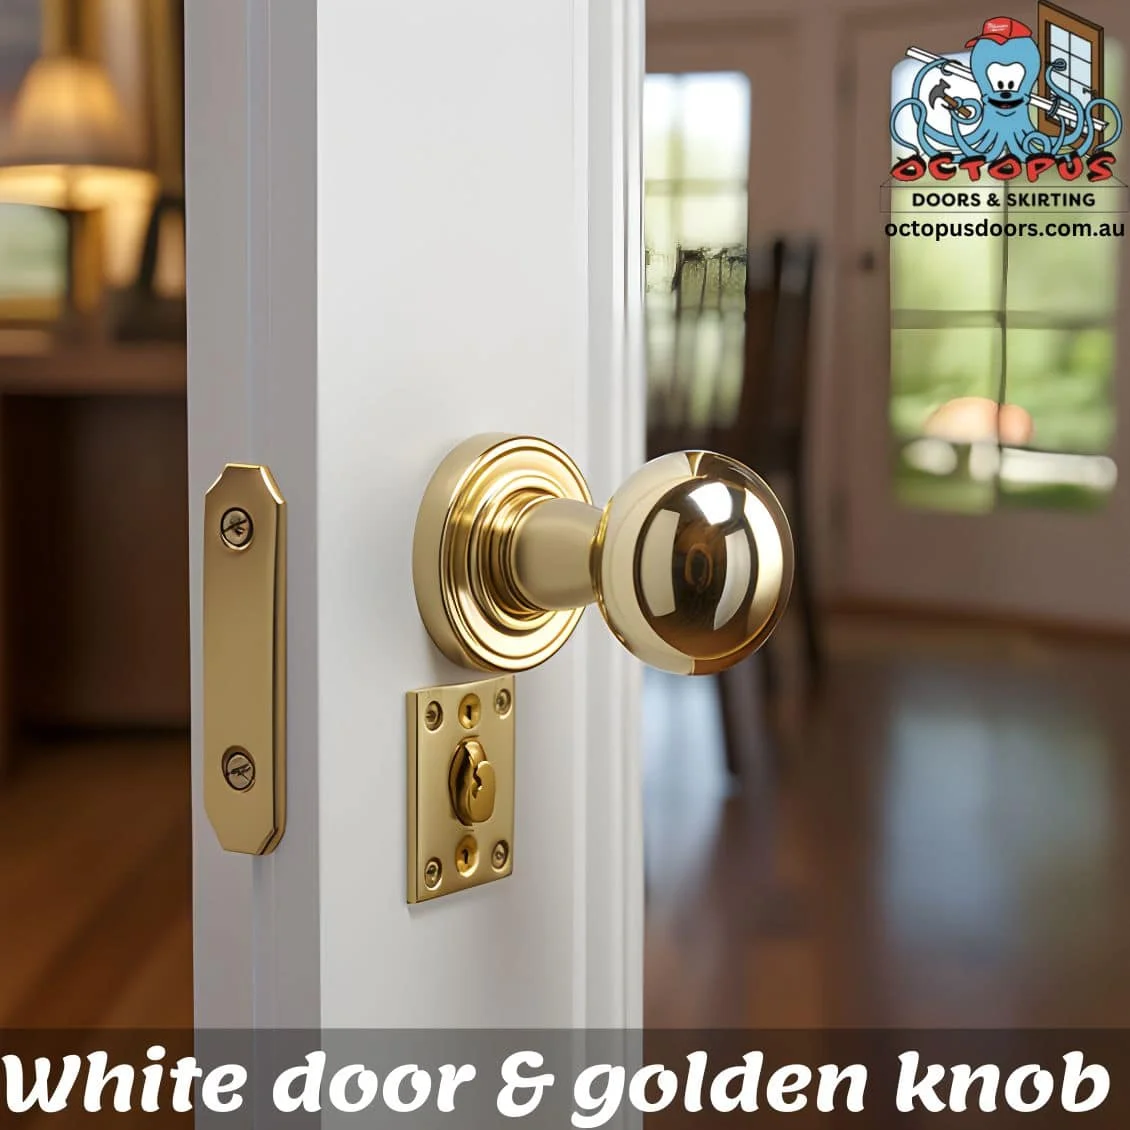 Step-by-Step Guide: How to Install Dummy Door Knobs on French Doors –  Octopus Doors & Skirting